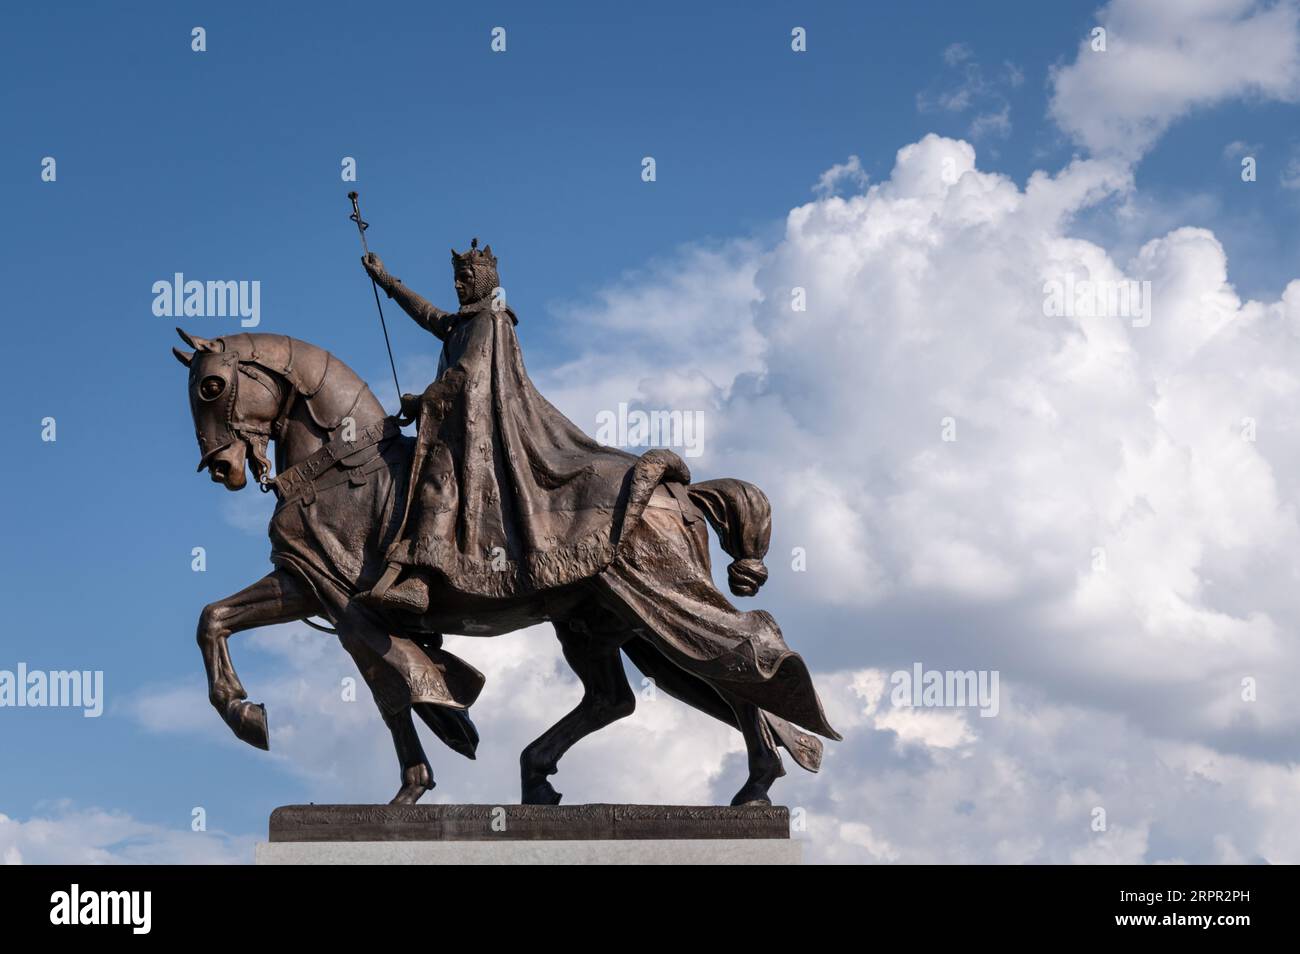 Apotheosis of St. Louis IX, King of France, in Forest Park, St. Louis, Missouri. Stock Photo